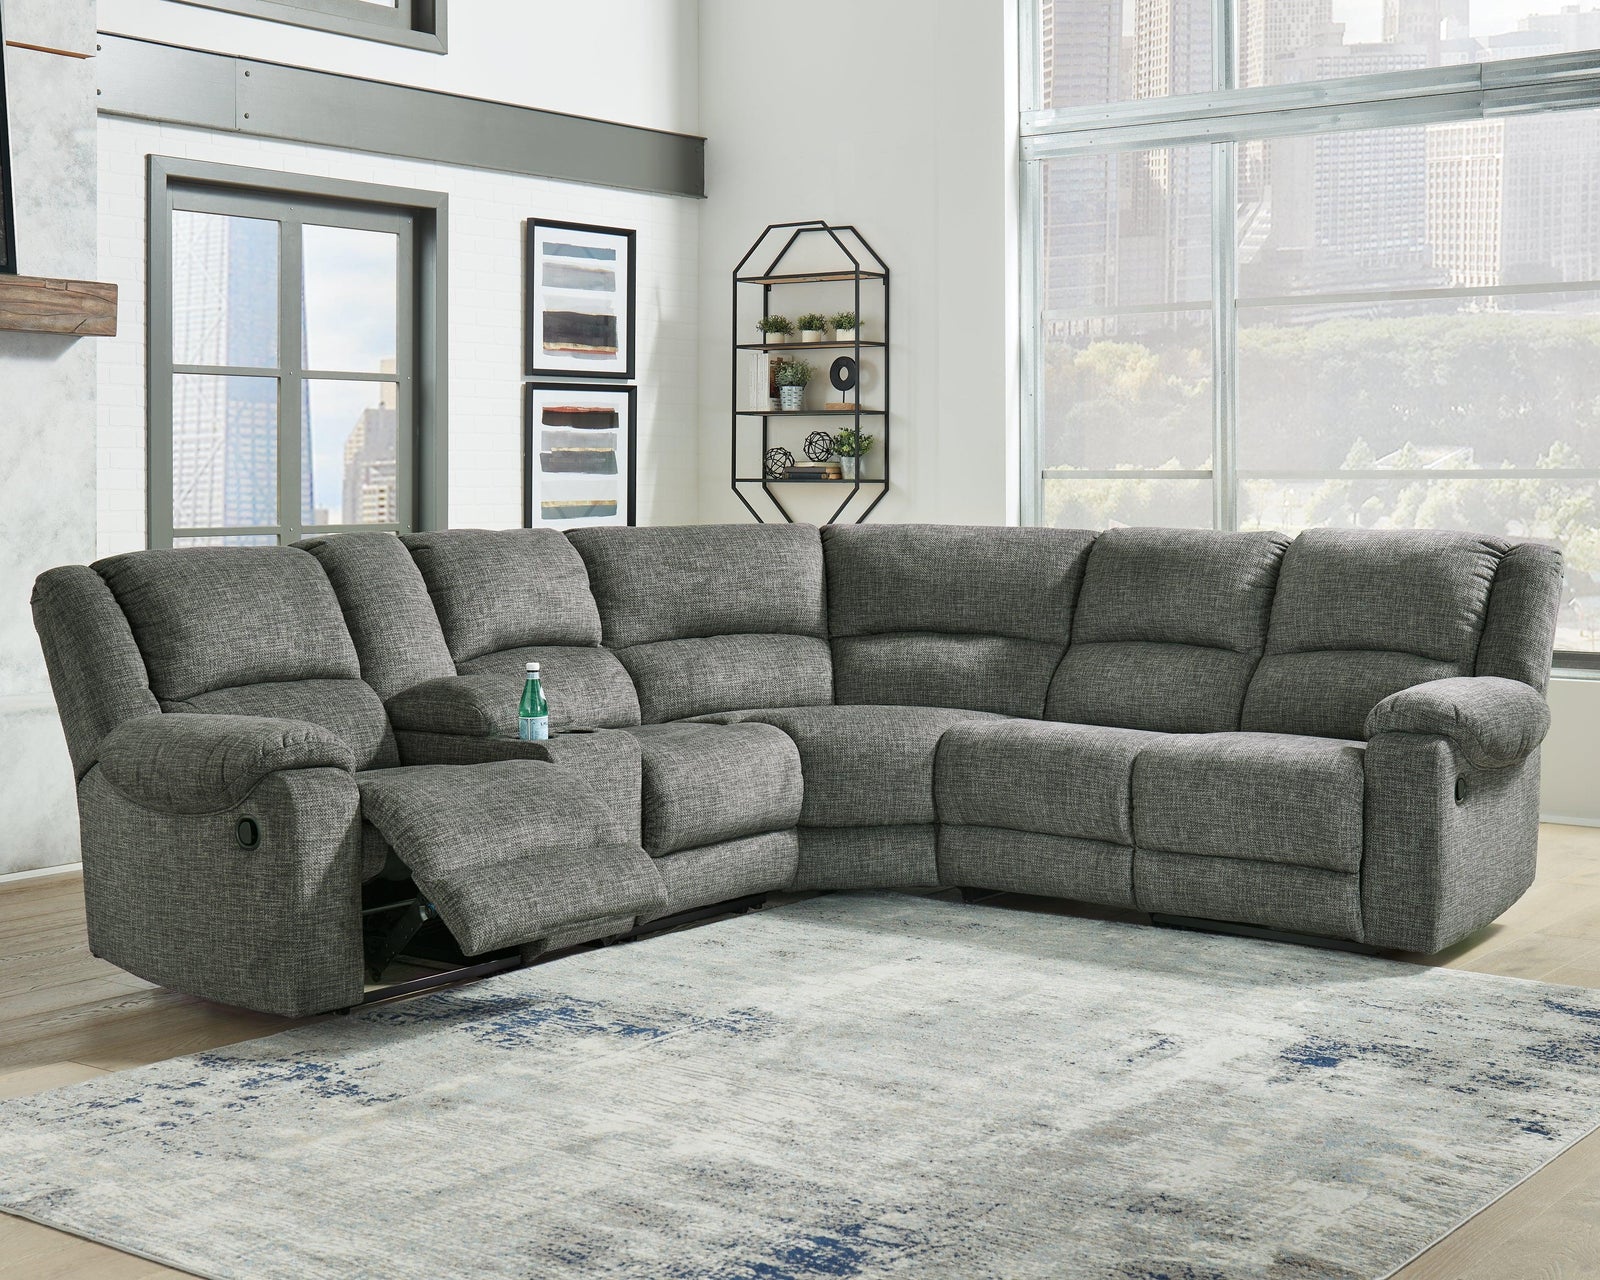 Goalie Pewter 6-Piece Reclining Sectional